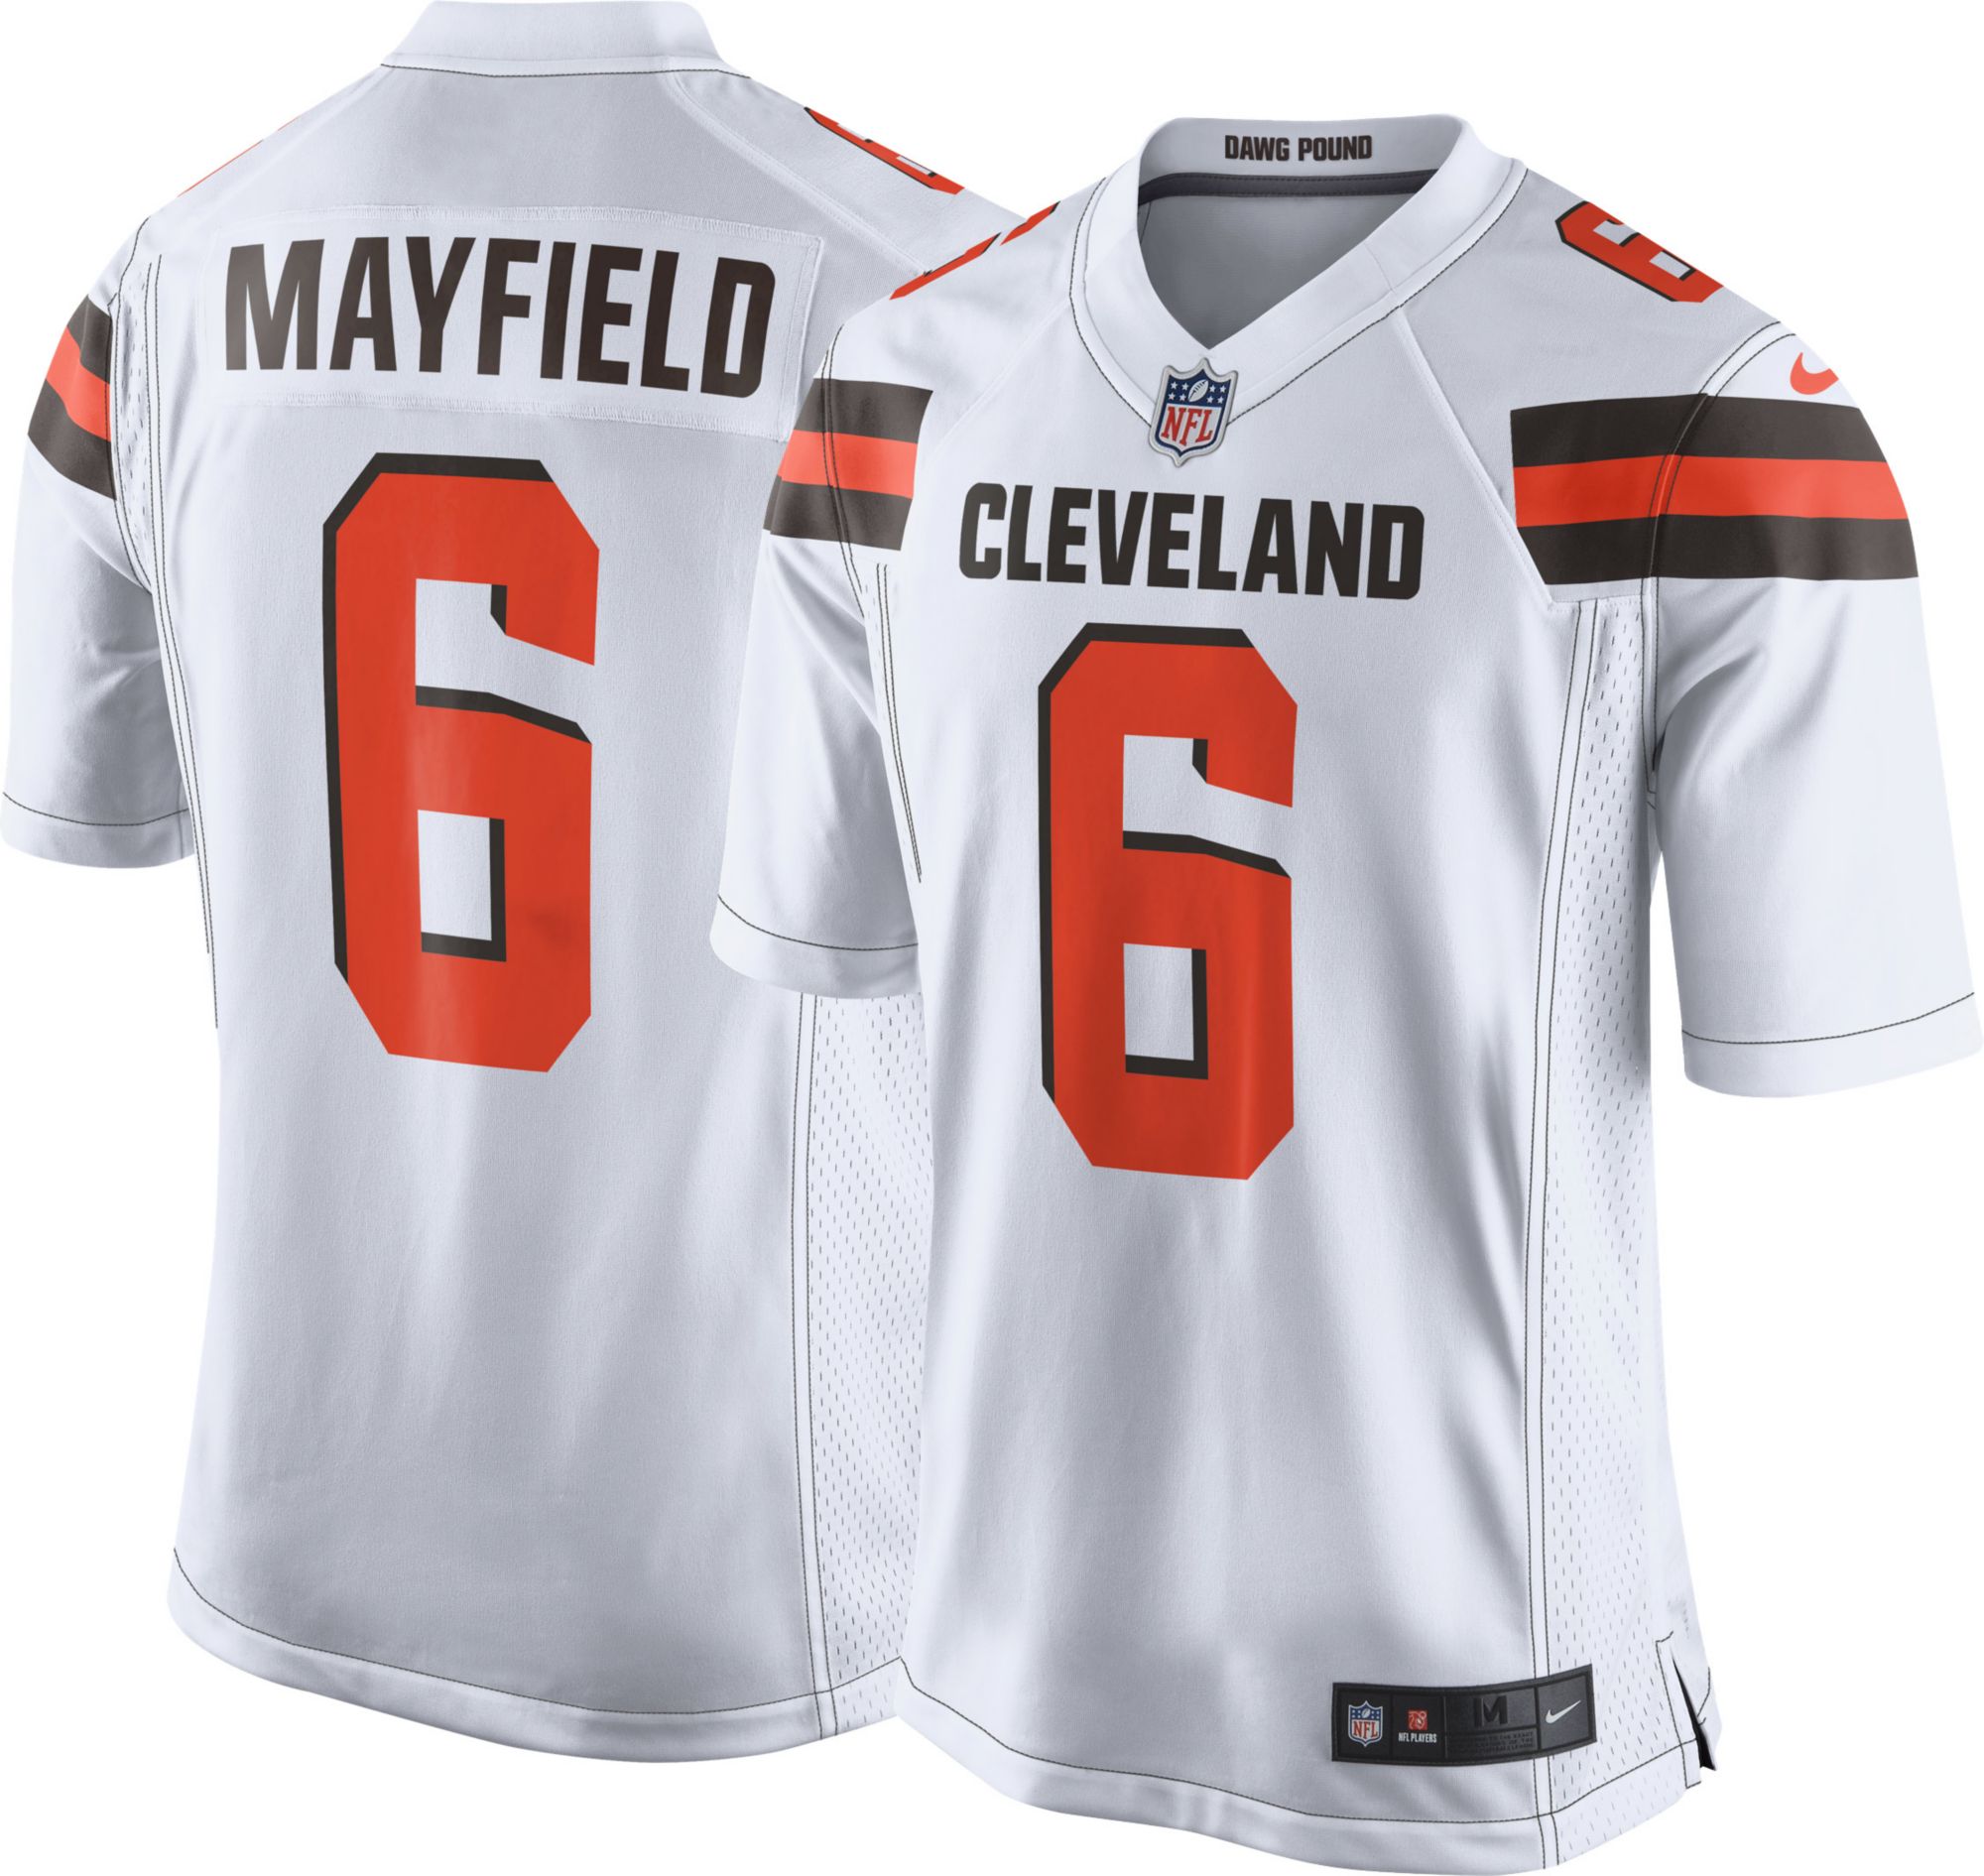 jersey cleveland browns